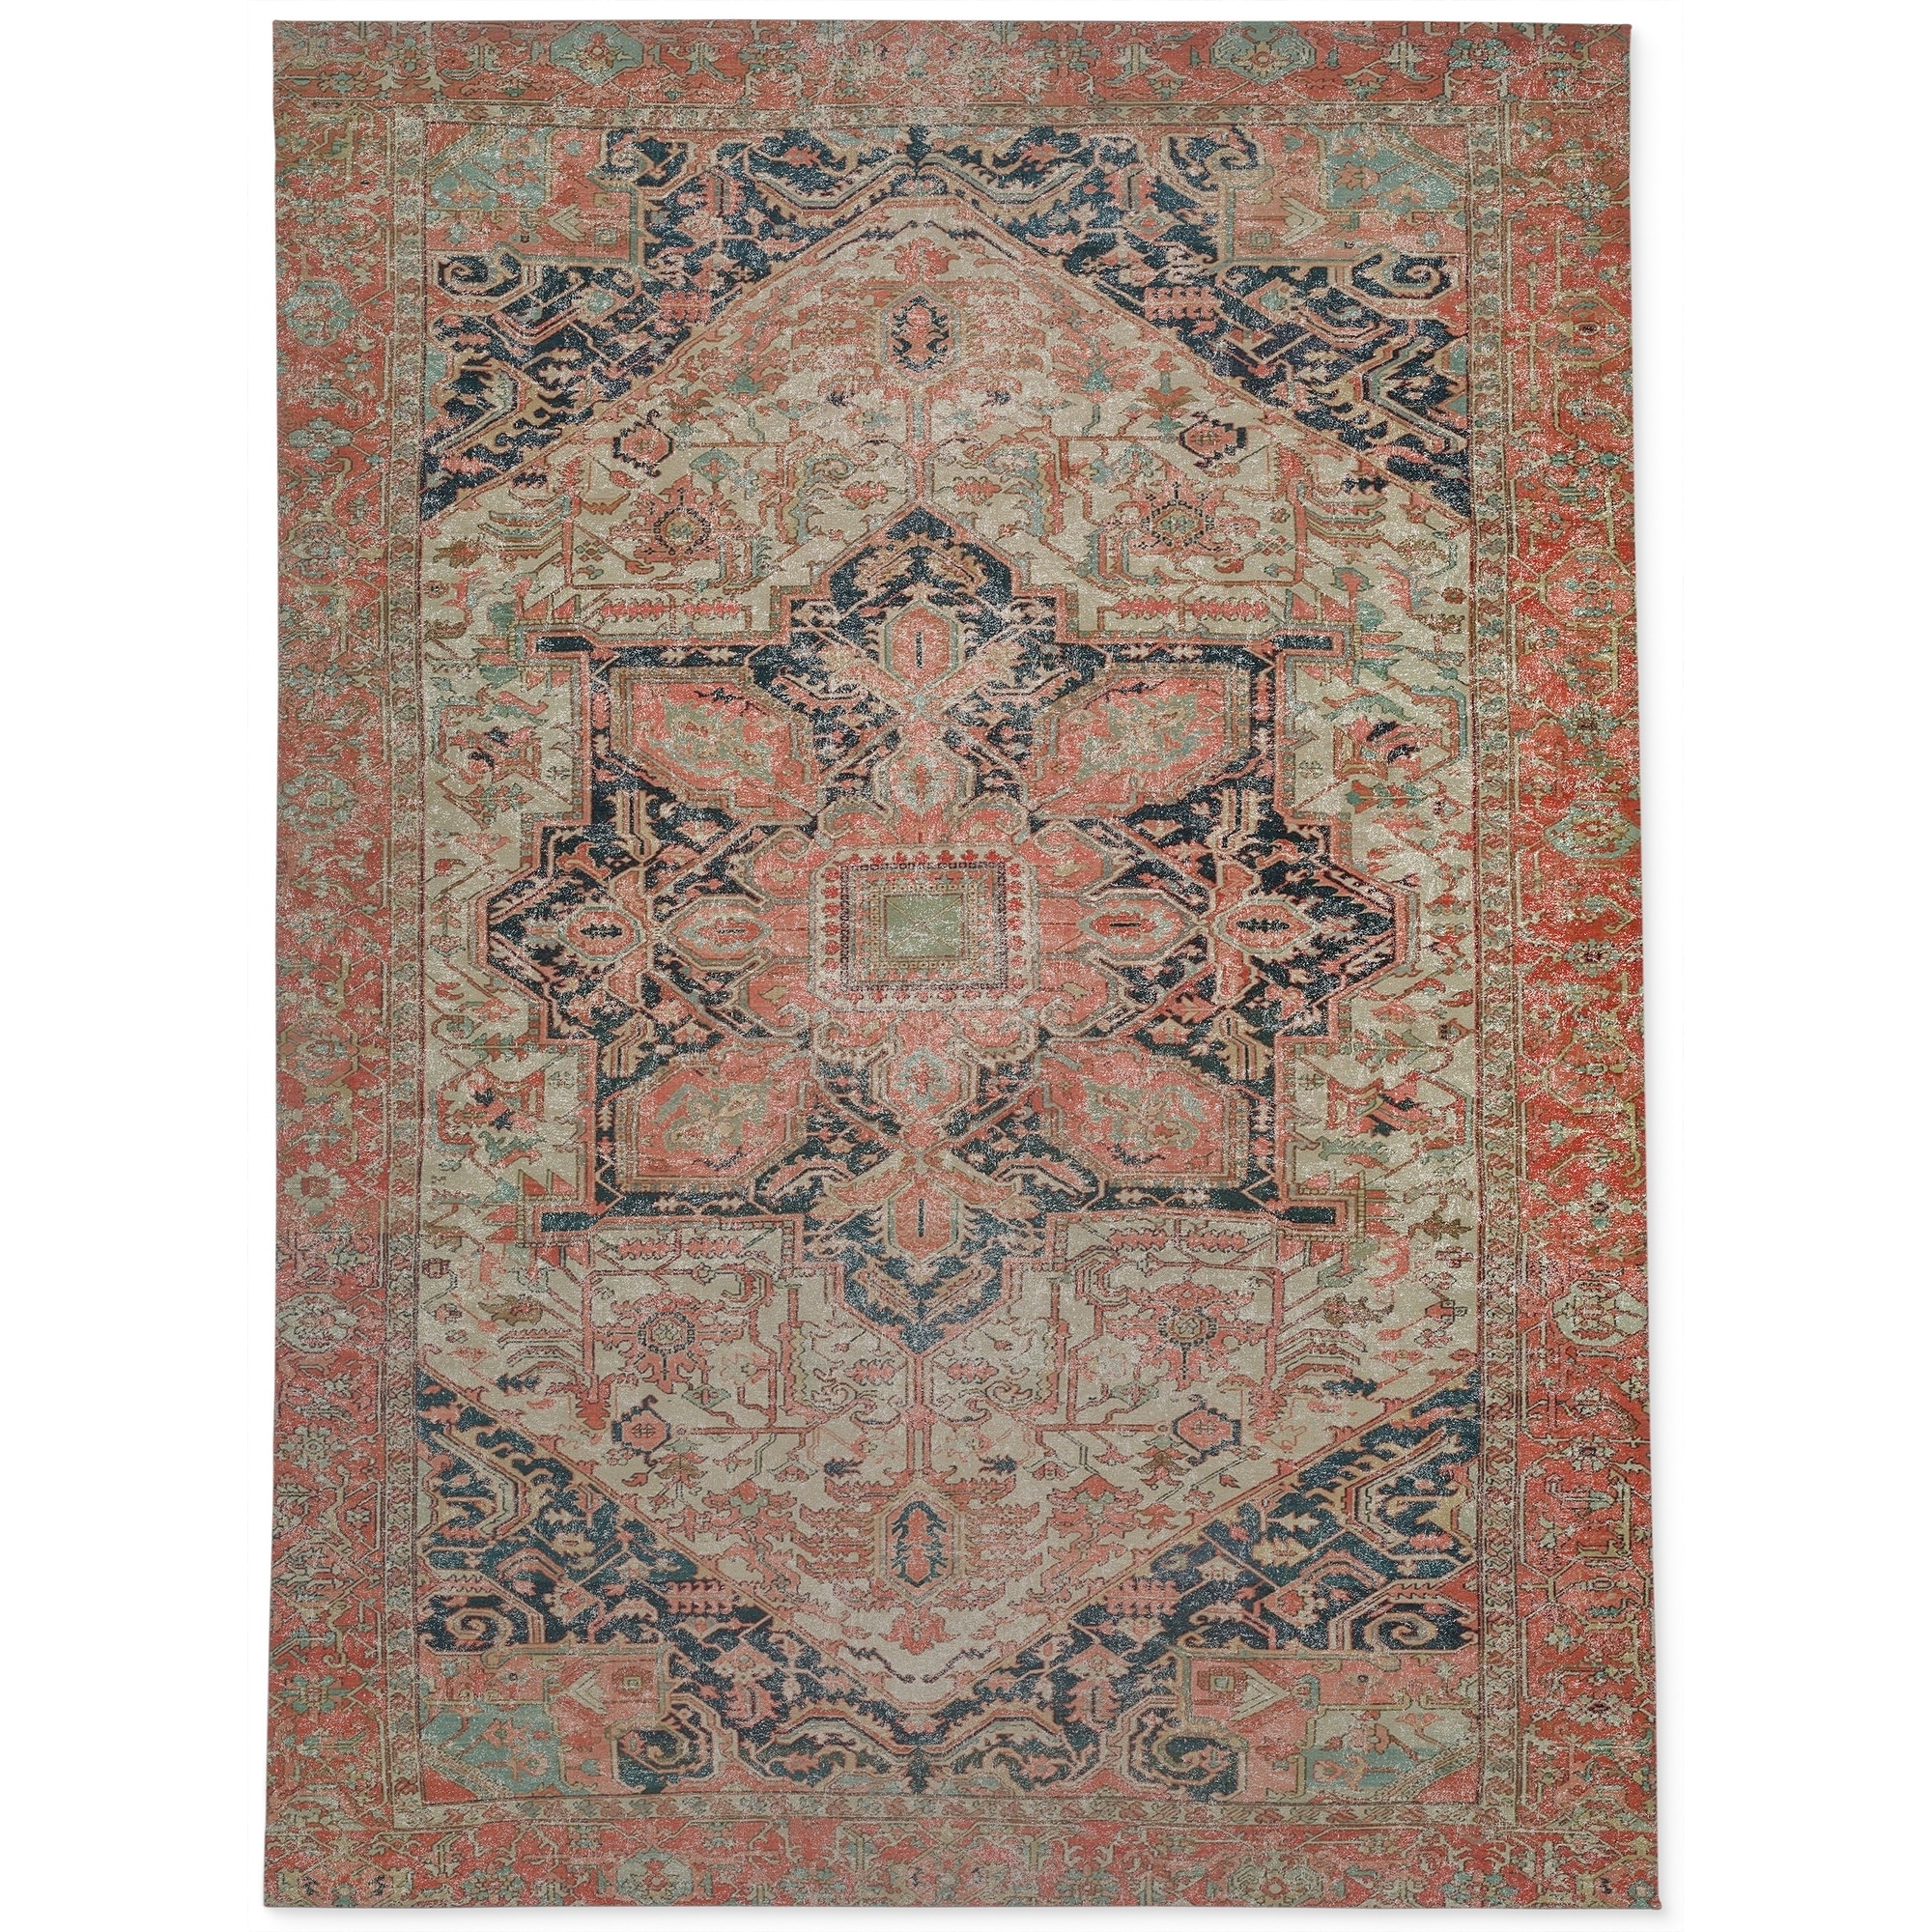 Herez Rust Area Rug By Kavka Designs